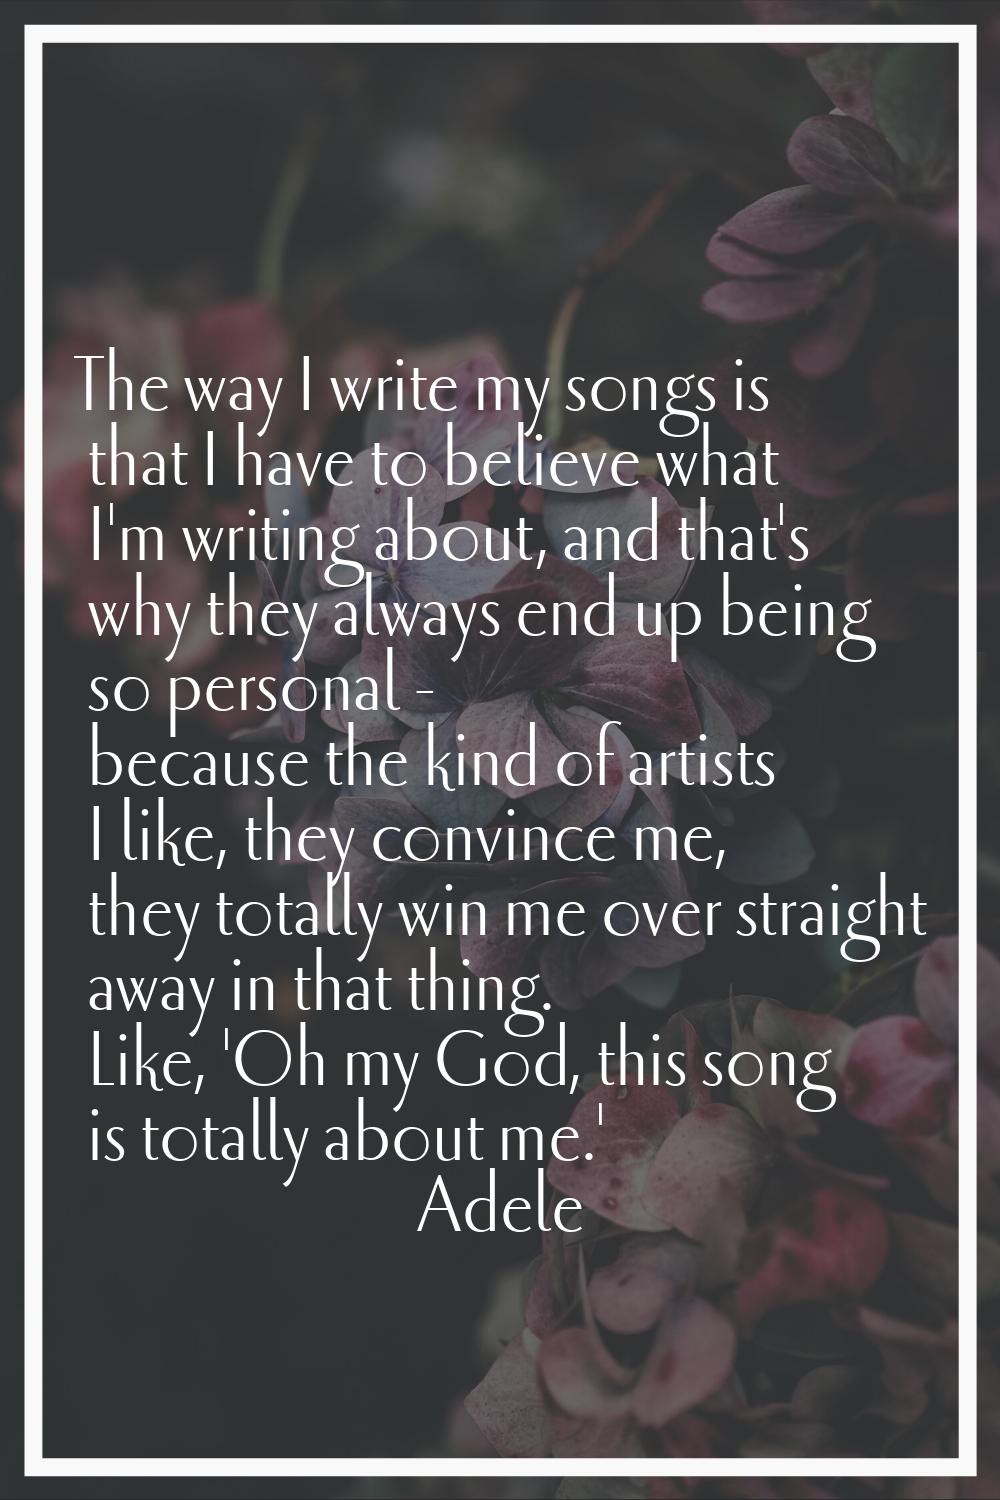 The way I write my songs is that I have to believe what I'm writing about, and that's why they alwa